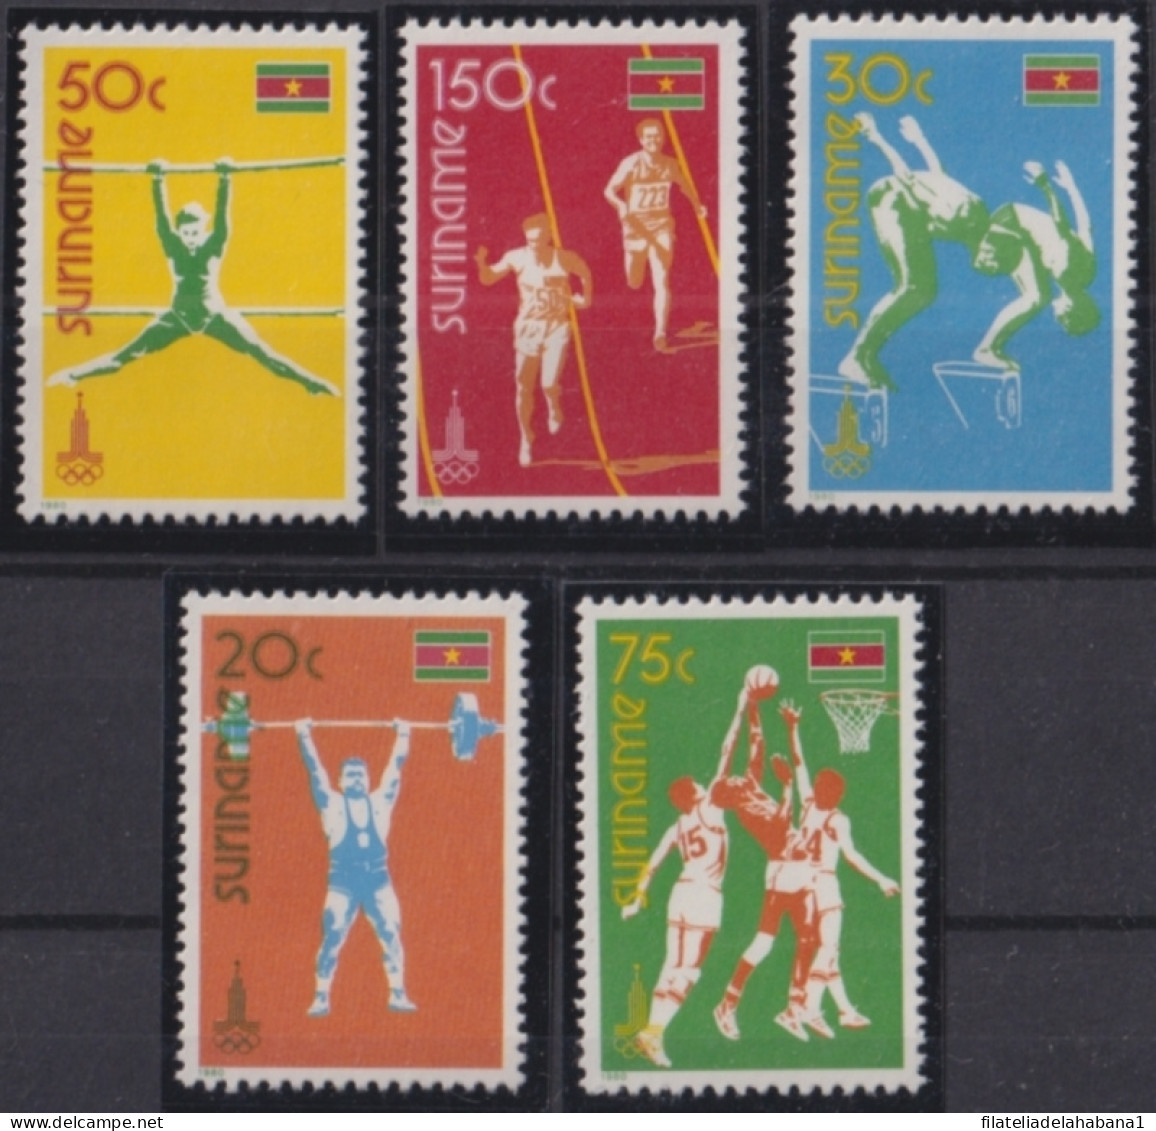 F-EX50224 SURINAME MNH 1980 OLYMPIC GAMES MOSCOW ATHLETISM SWIMMING BASKET.  - Ete 1980: Moscou